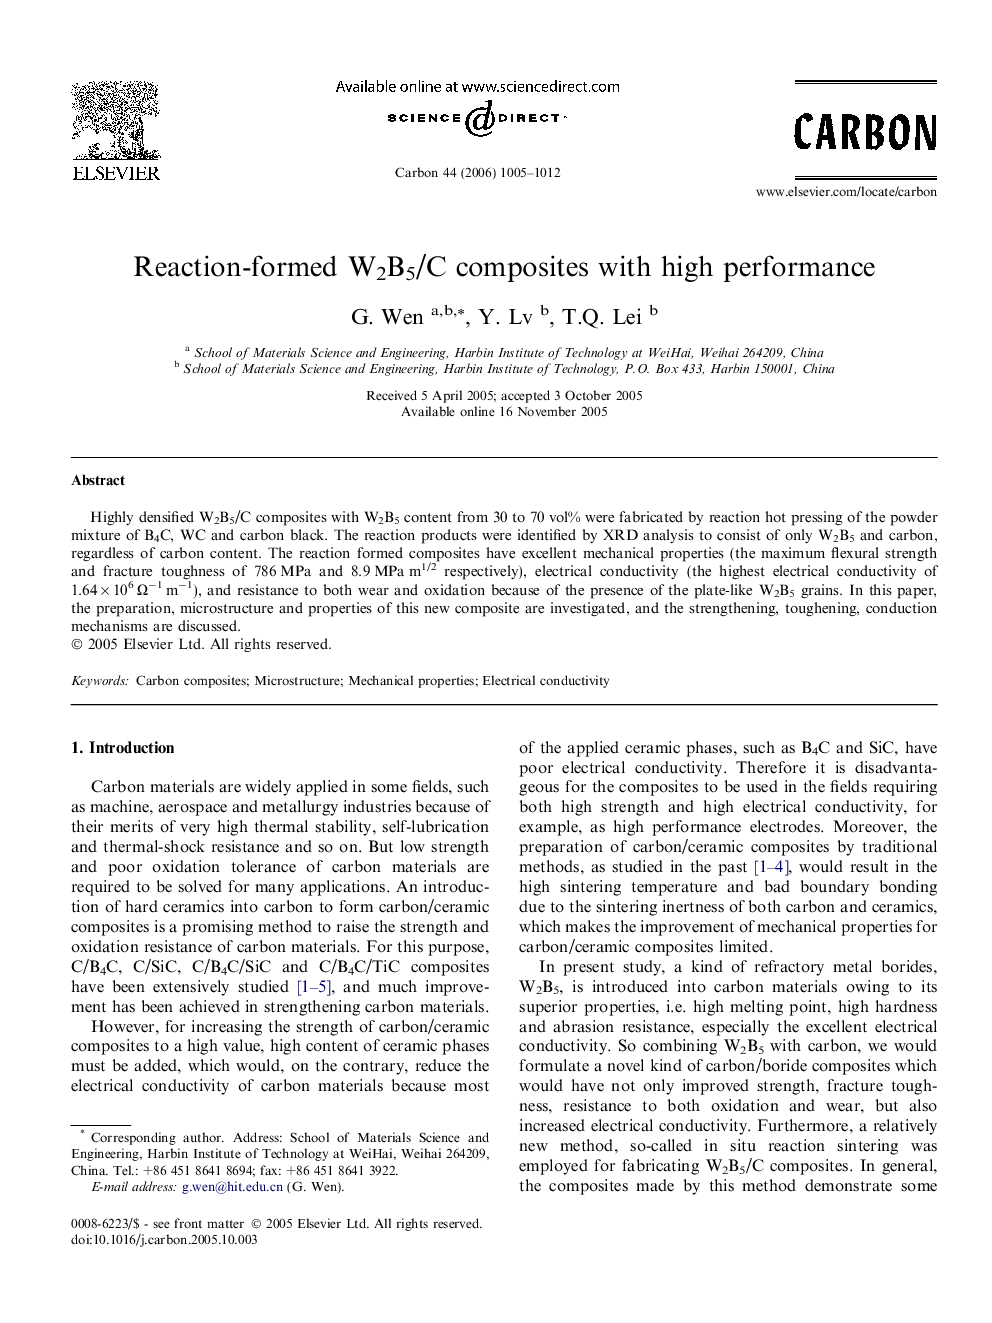 Reaction-formed W2B5/C composites with high performance